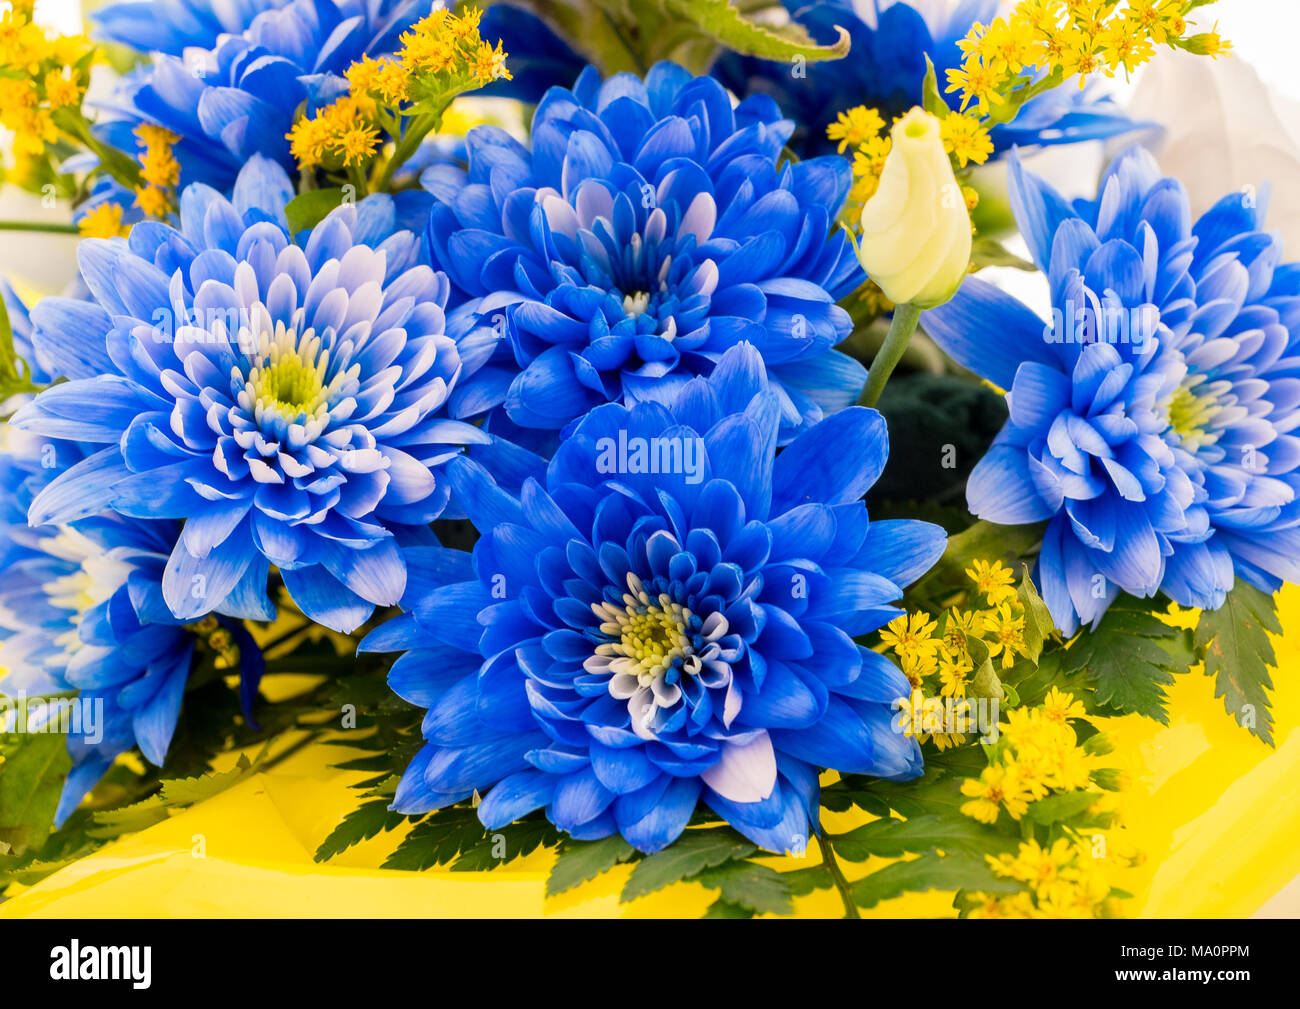 Blue aster flowers and other species in a floral bouquet Stock Photo